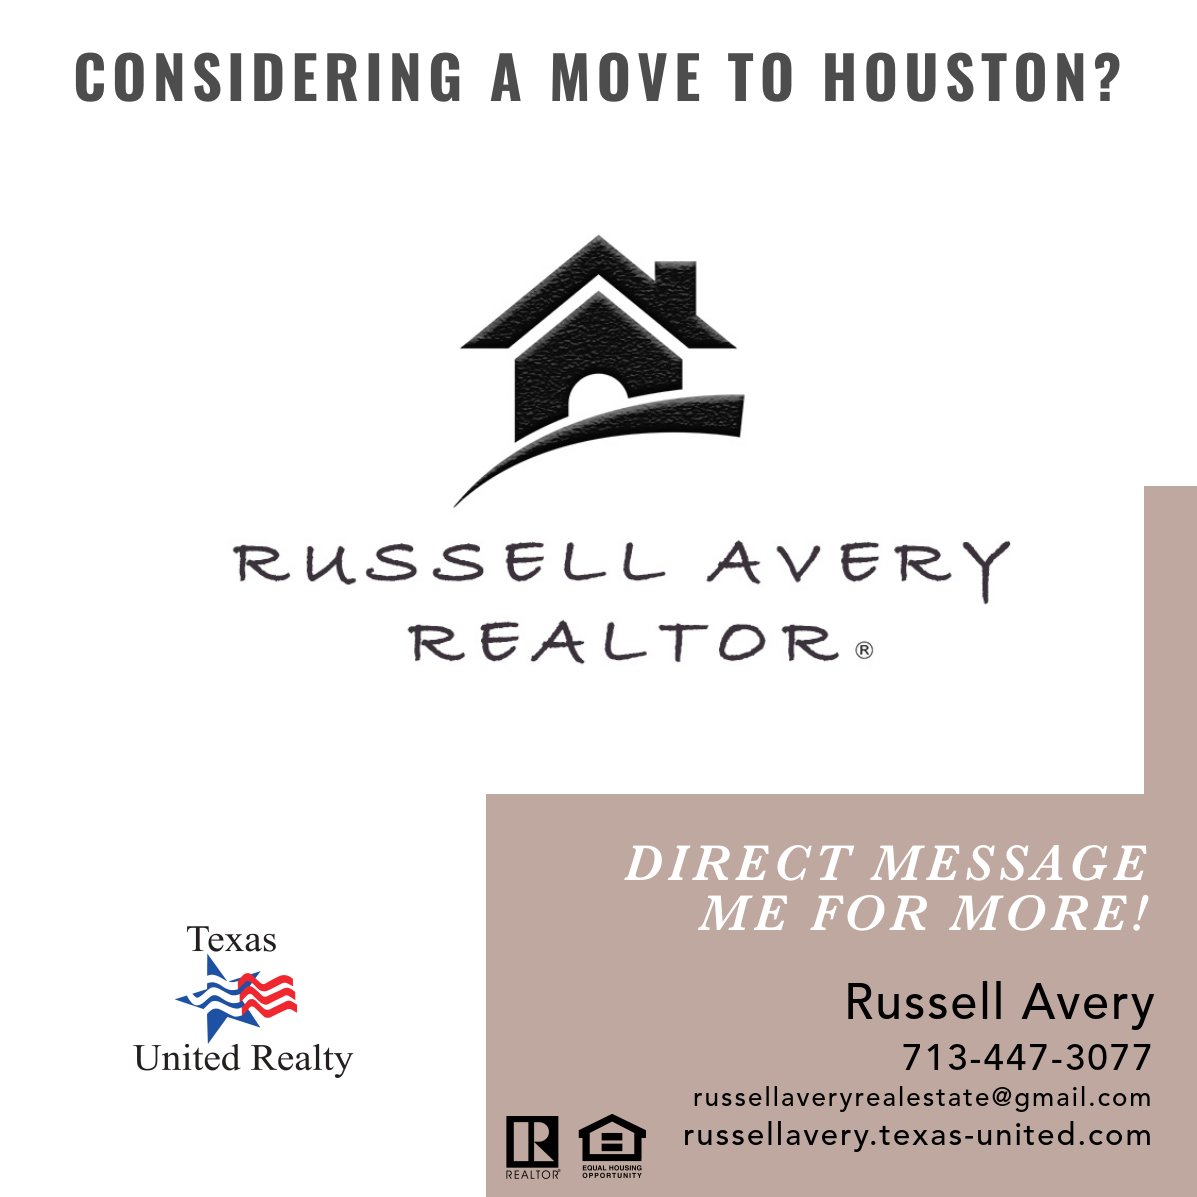 I love helping clients find a home to live in Texas. #realtor #houstonrealtor #realestateagent #houstonrealestateagent #apartmentlocator #houstonapartmentlocator #RentToOwn #RentToOwnHouse #renttoownhouses #houstonrenttoown #moving #movingtotexas #movingtohouston #movingsoon